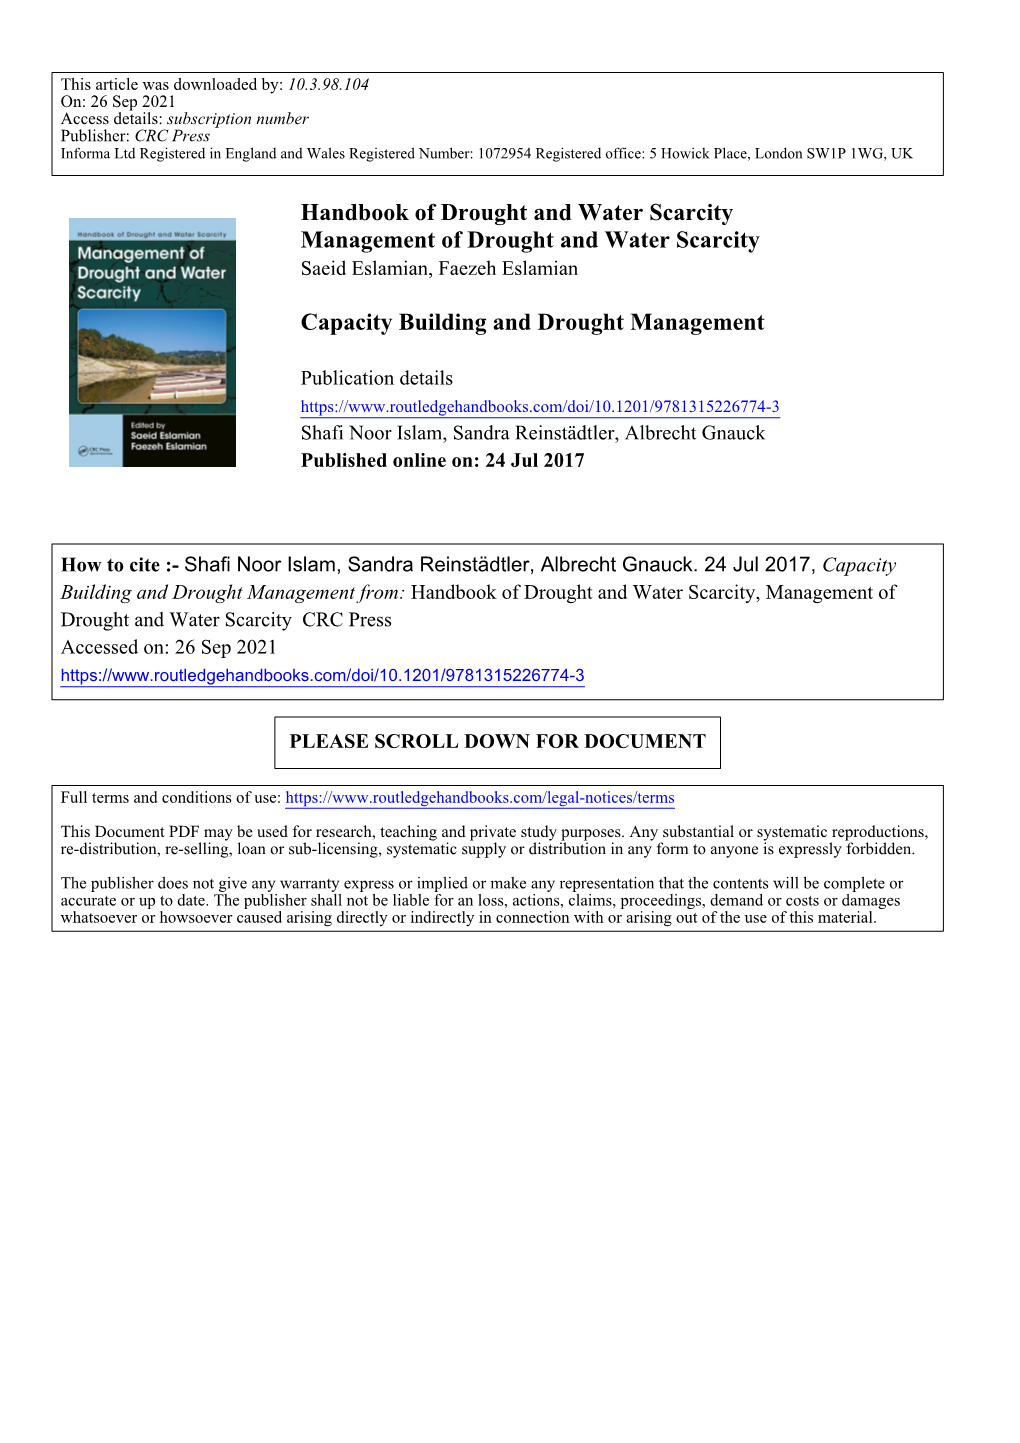 Handbook of Drought and Water Scarcity Management of Drought and Water Scarcity Saeid Eslamian, Faezeh Eslamian